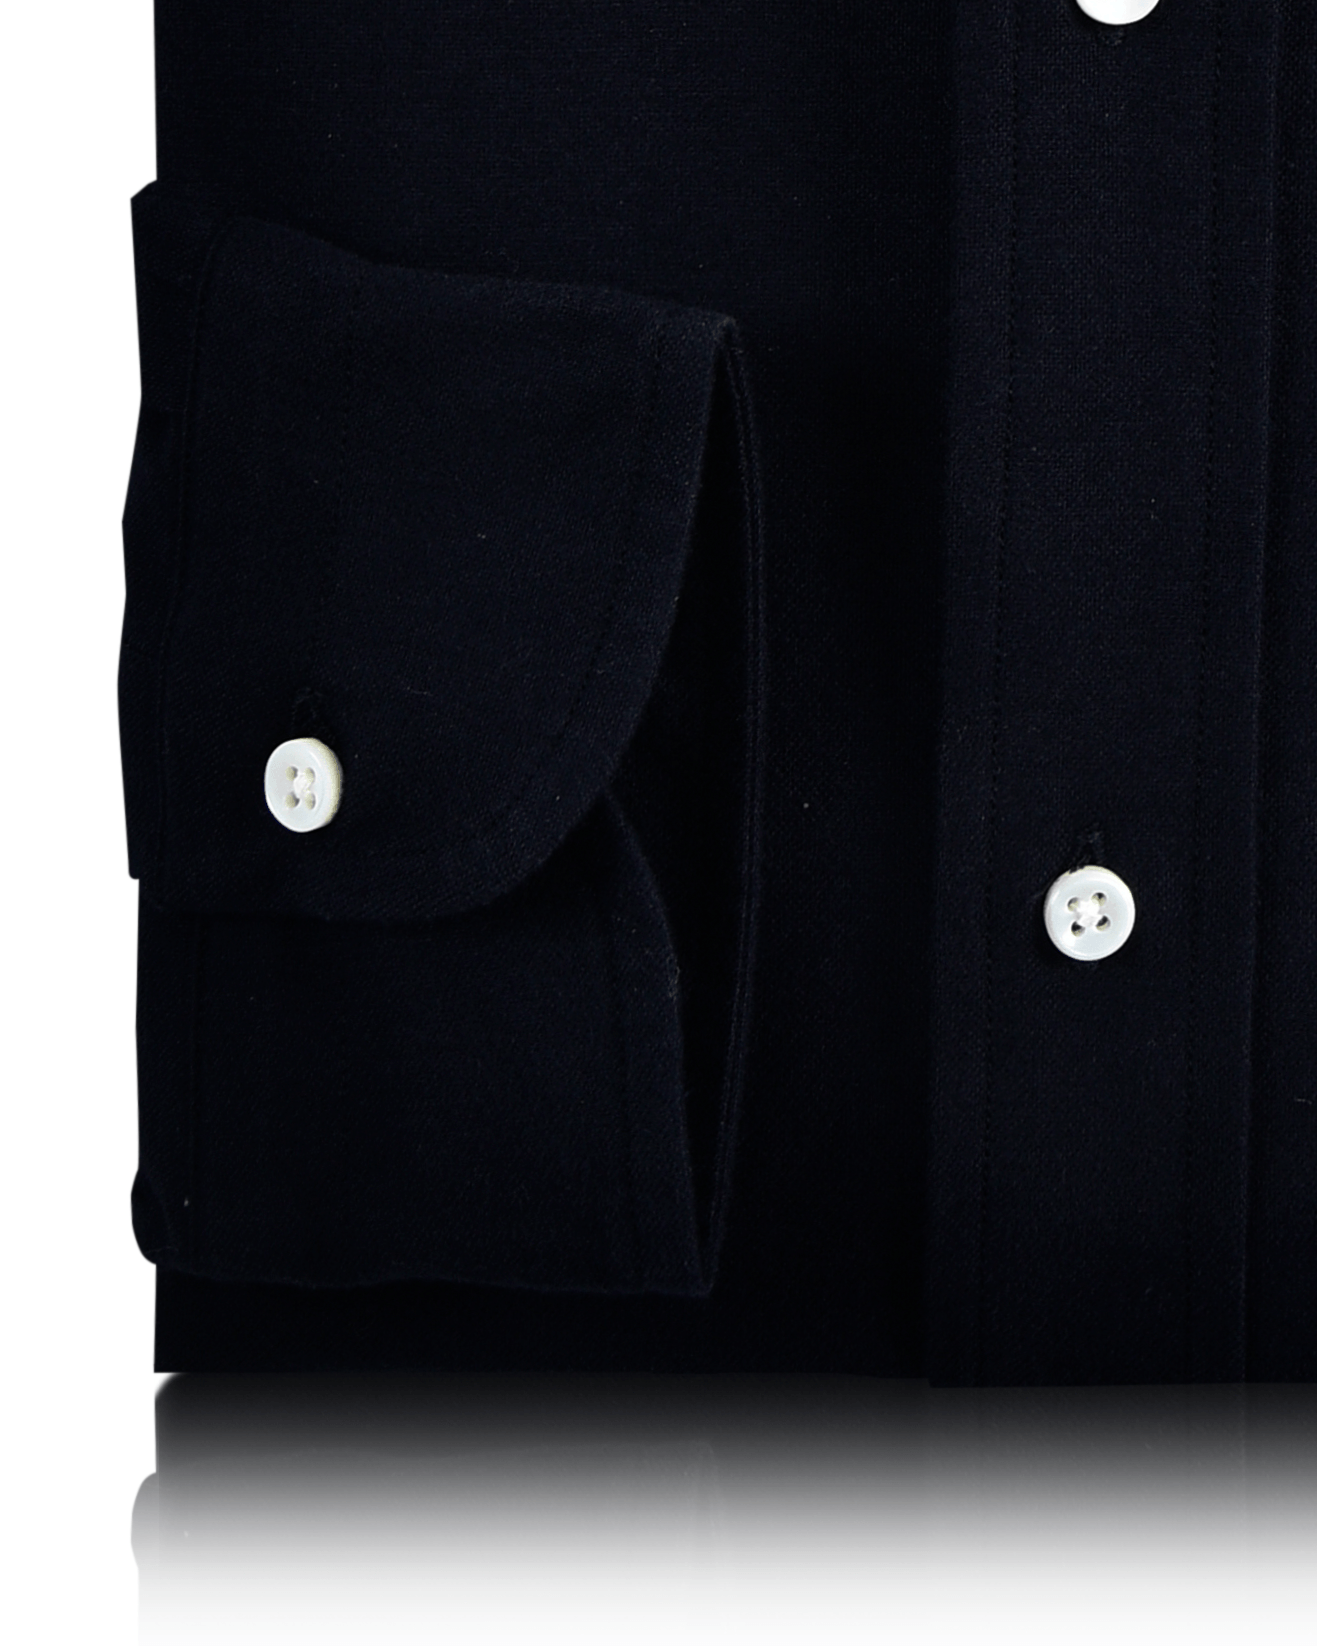 Cuff of the custom oxford shirt for men by Luxire in midnight navy